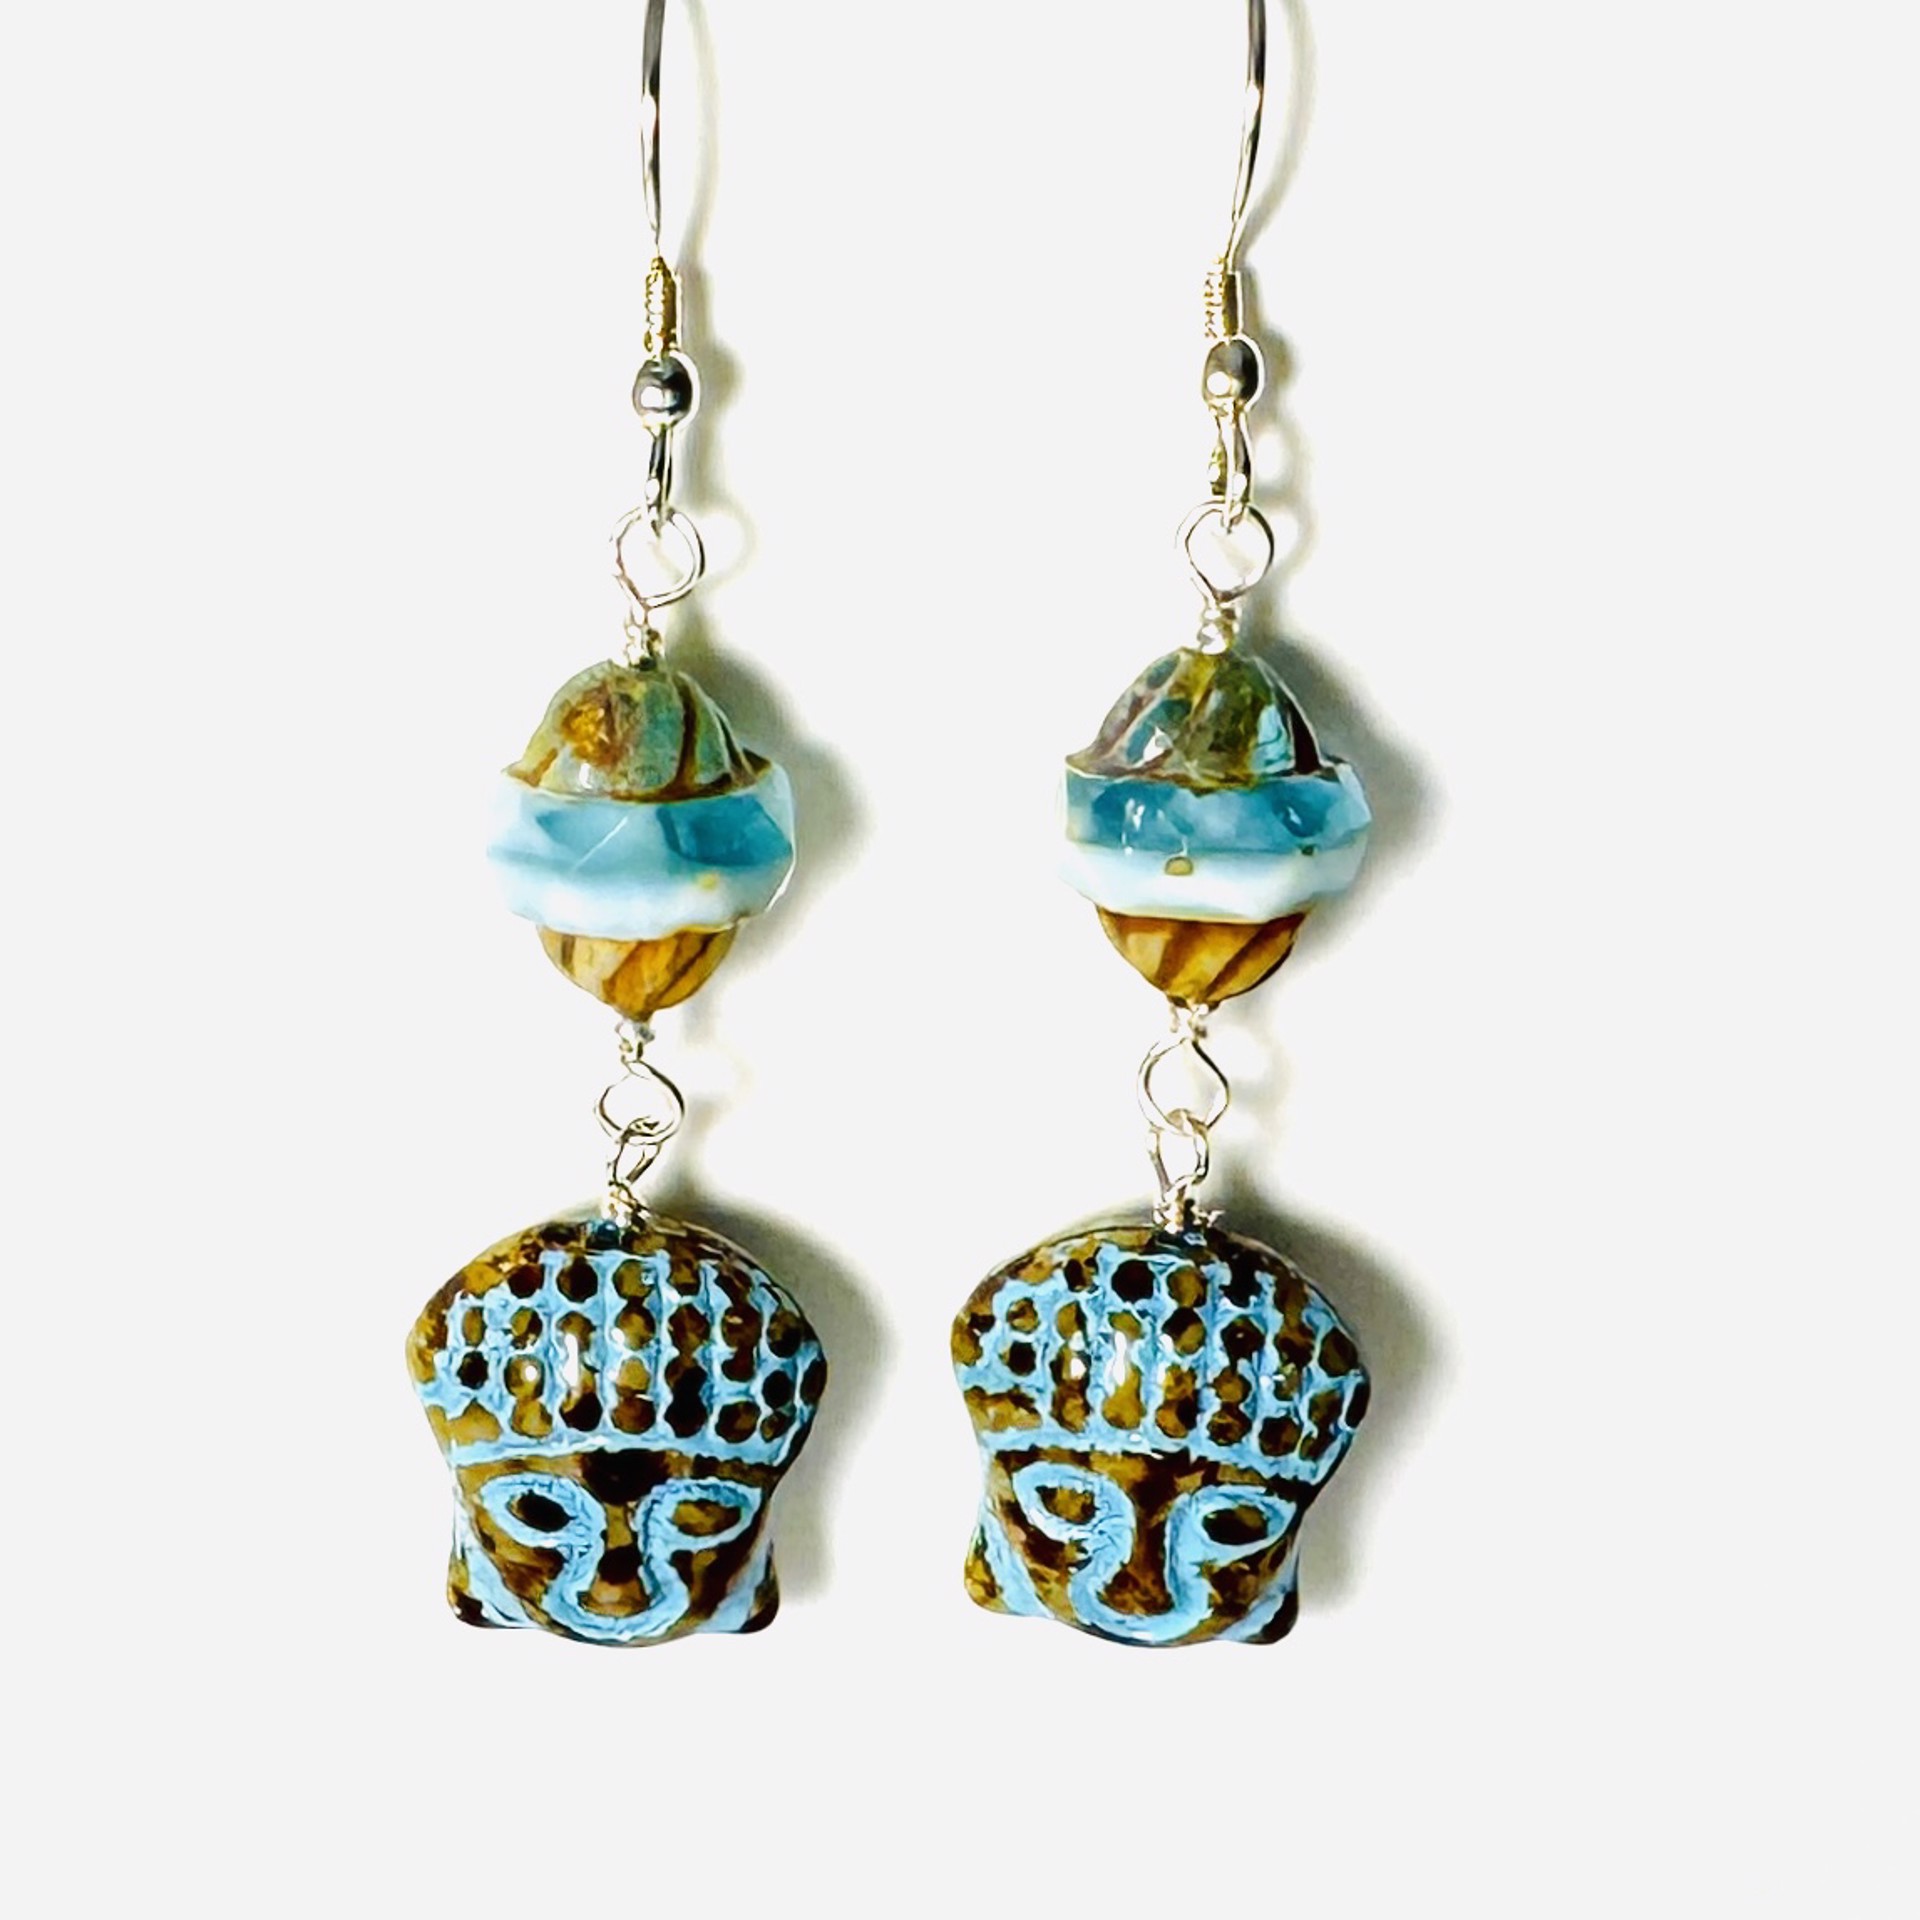 Czech Glass Buddha and Bead Earrings LR24-26 by Legare Riano